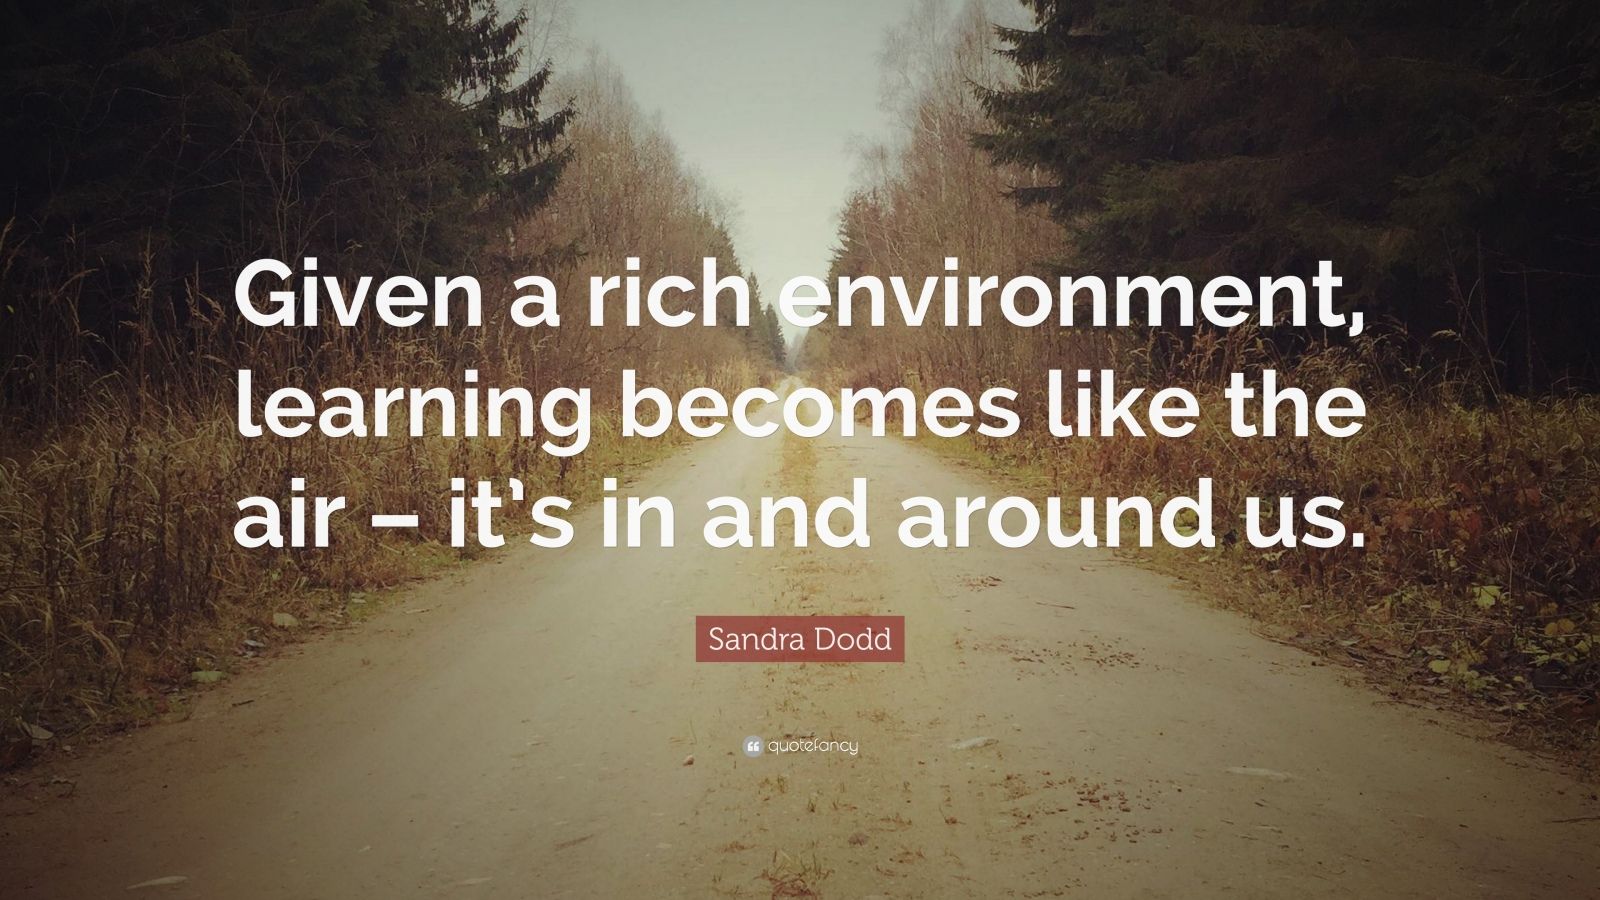 Sandra Dodd Quote: “Given a rich environment, learning becomes like the